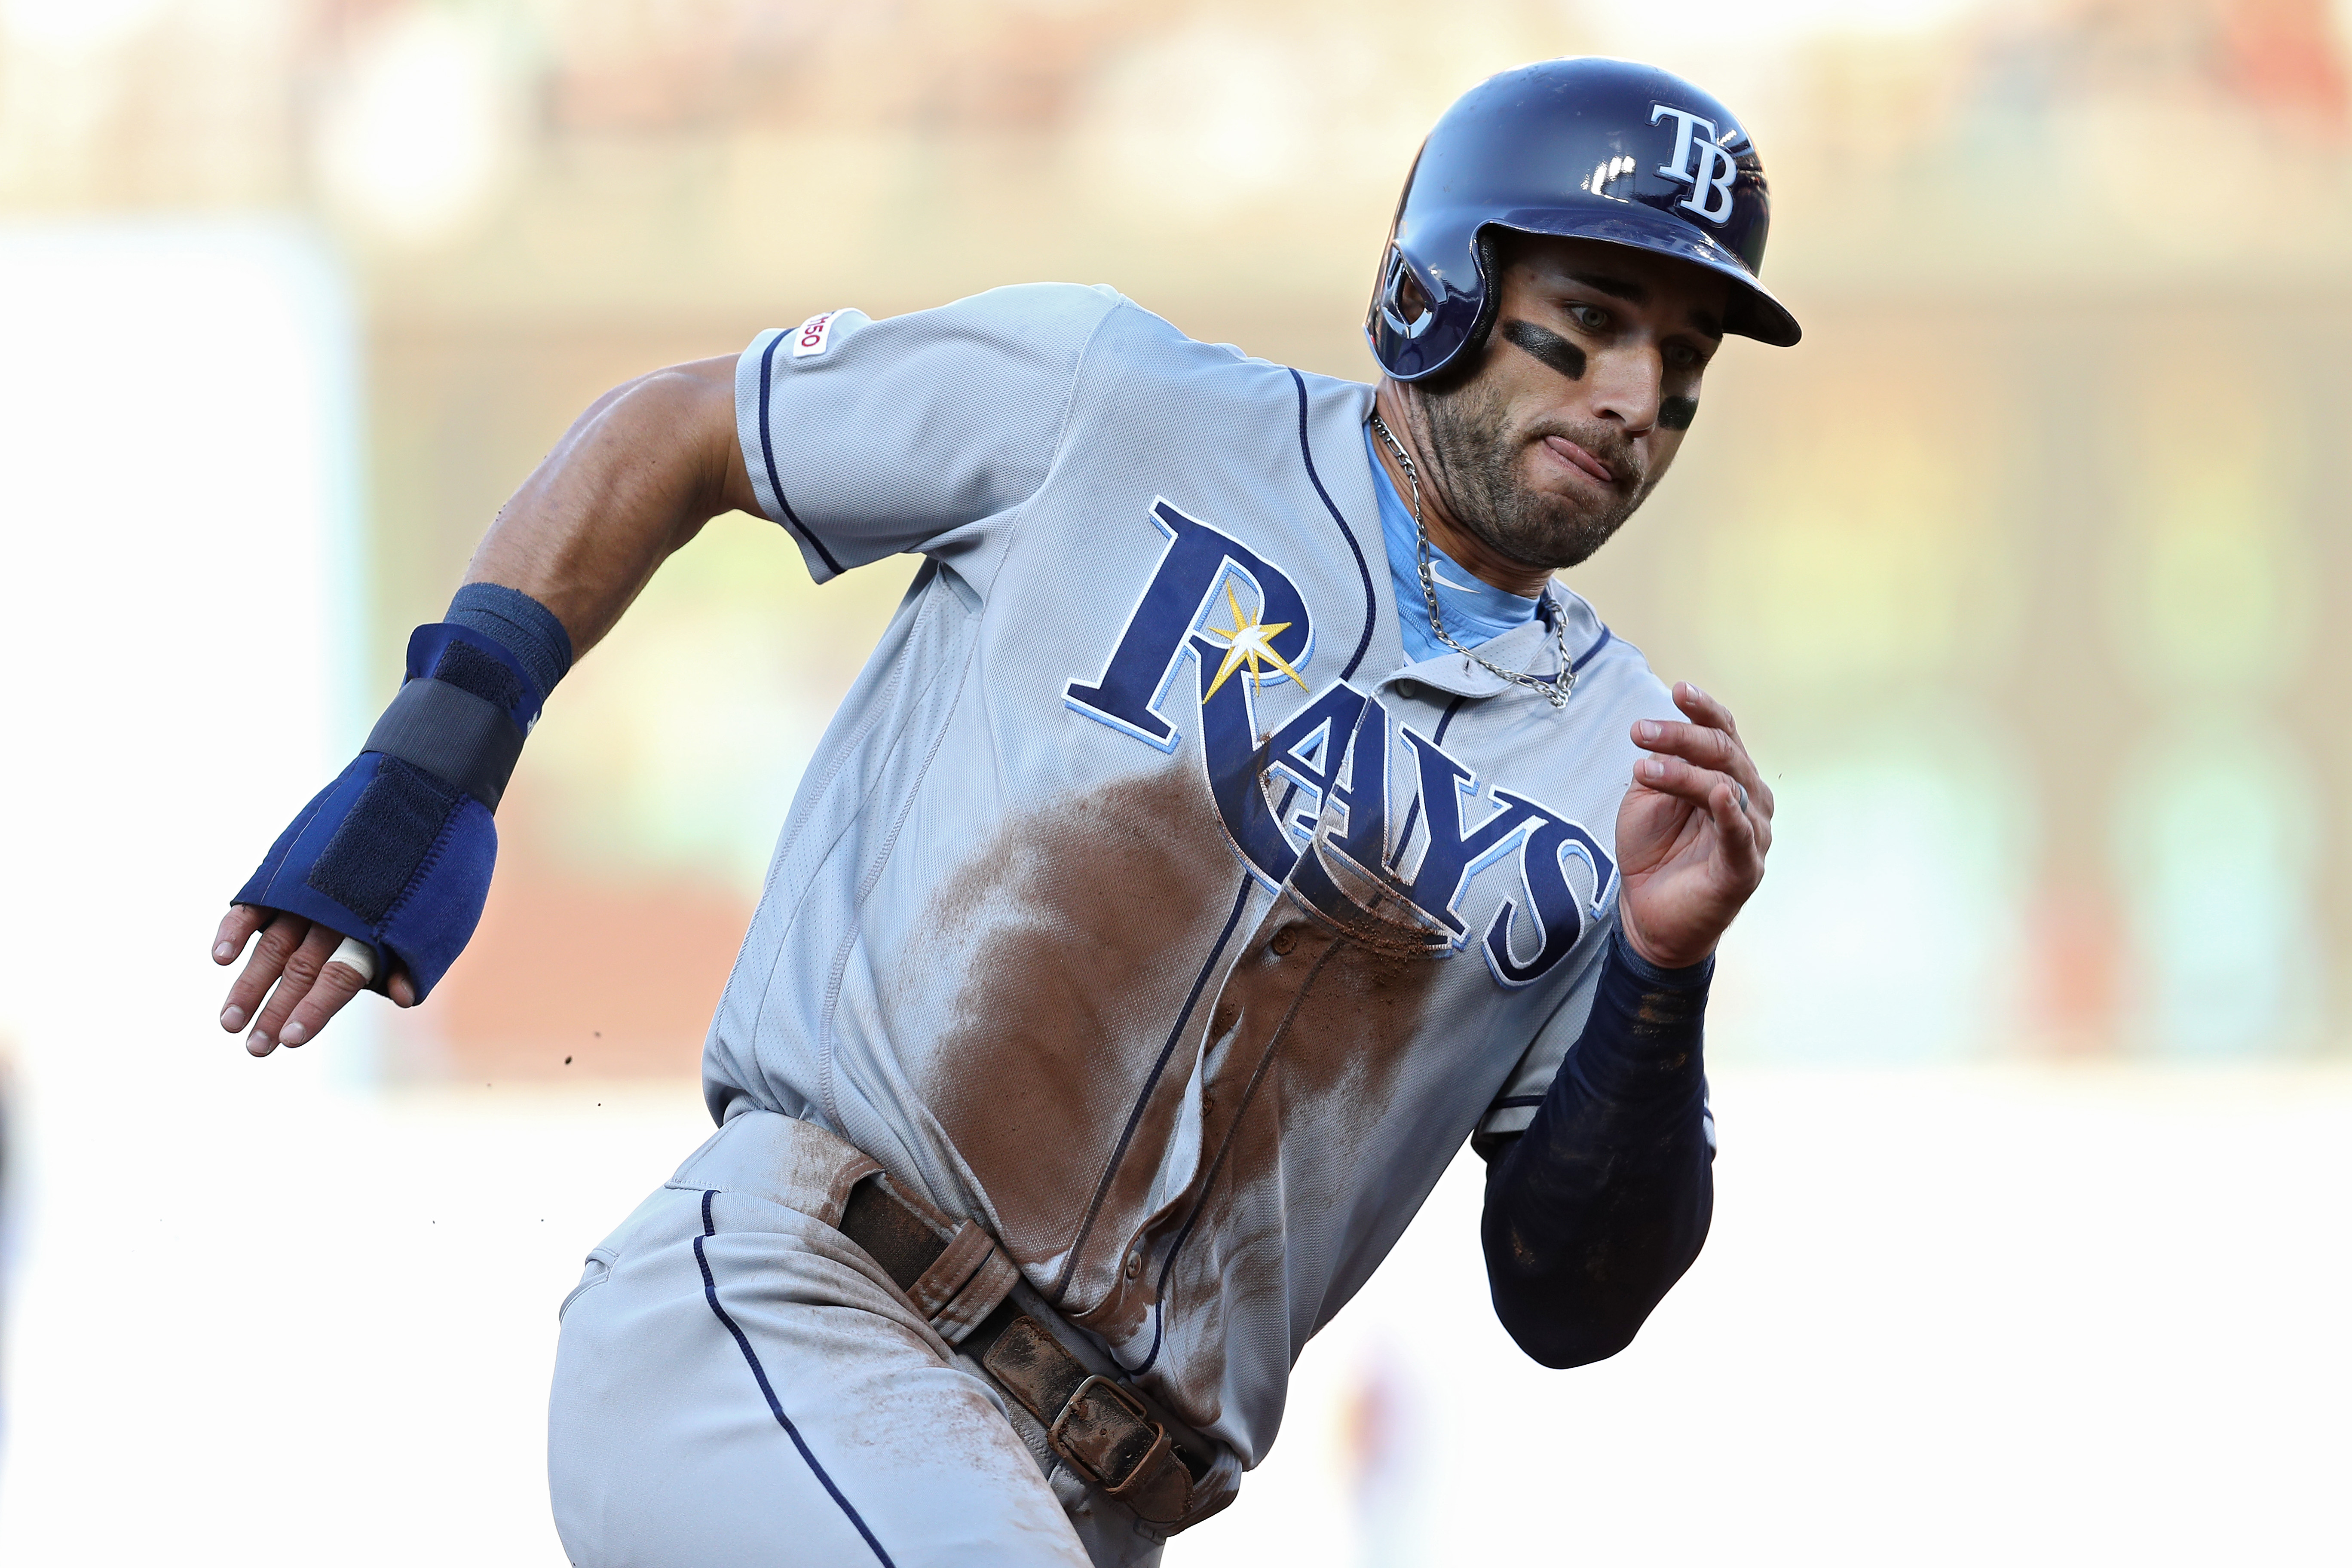 Kiermaier happy to remain with Rays, motivated to return to World